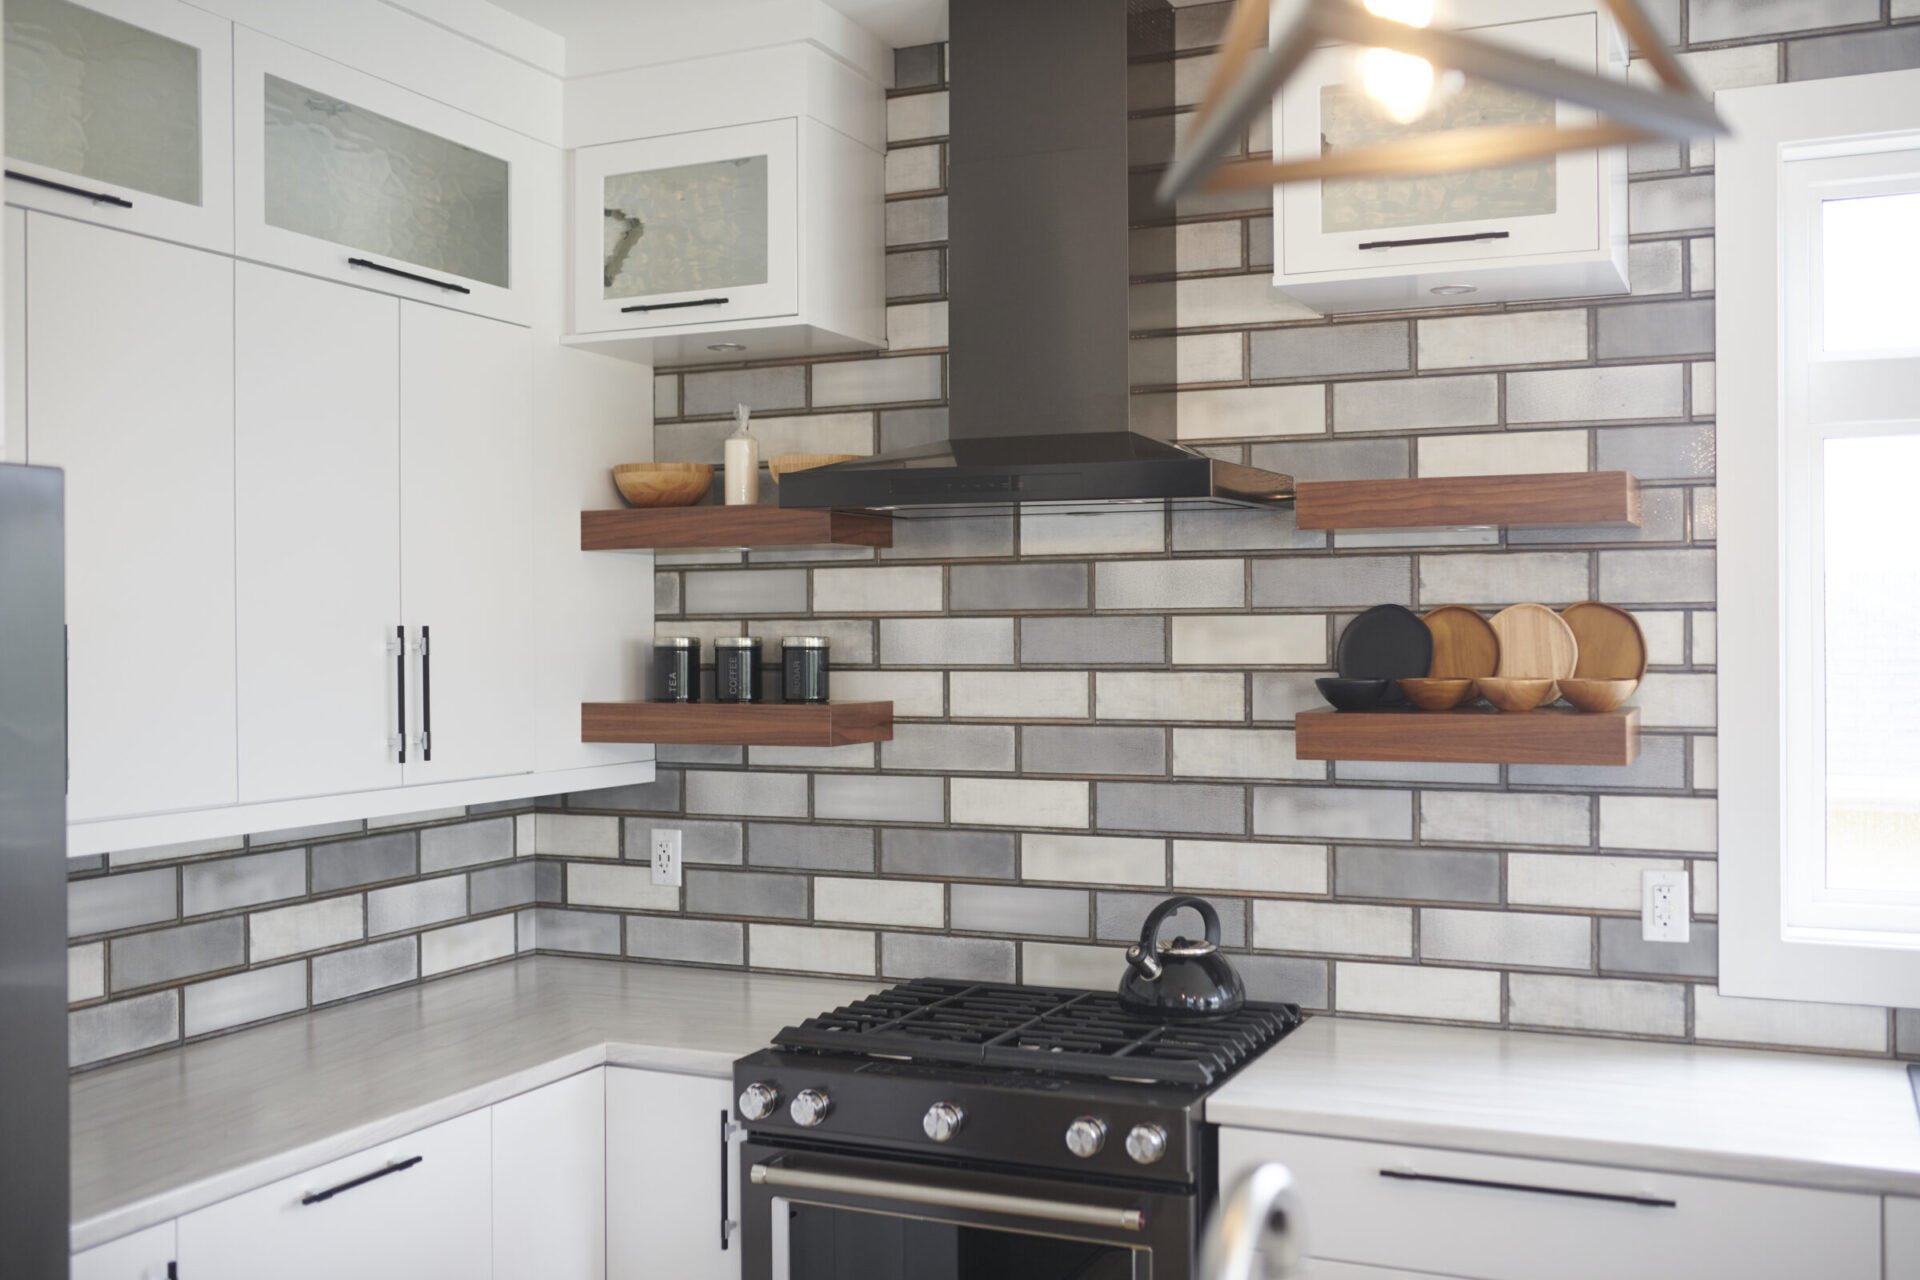 A modern kitchen with white cabinets, stainless steel appliances, floating wooden shelves, brick-style backsplash, and a kettle on the stove.